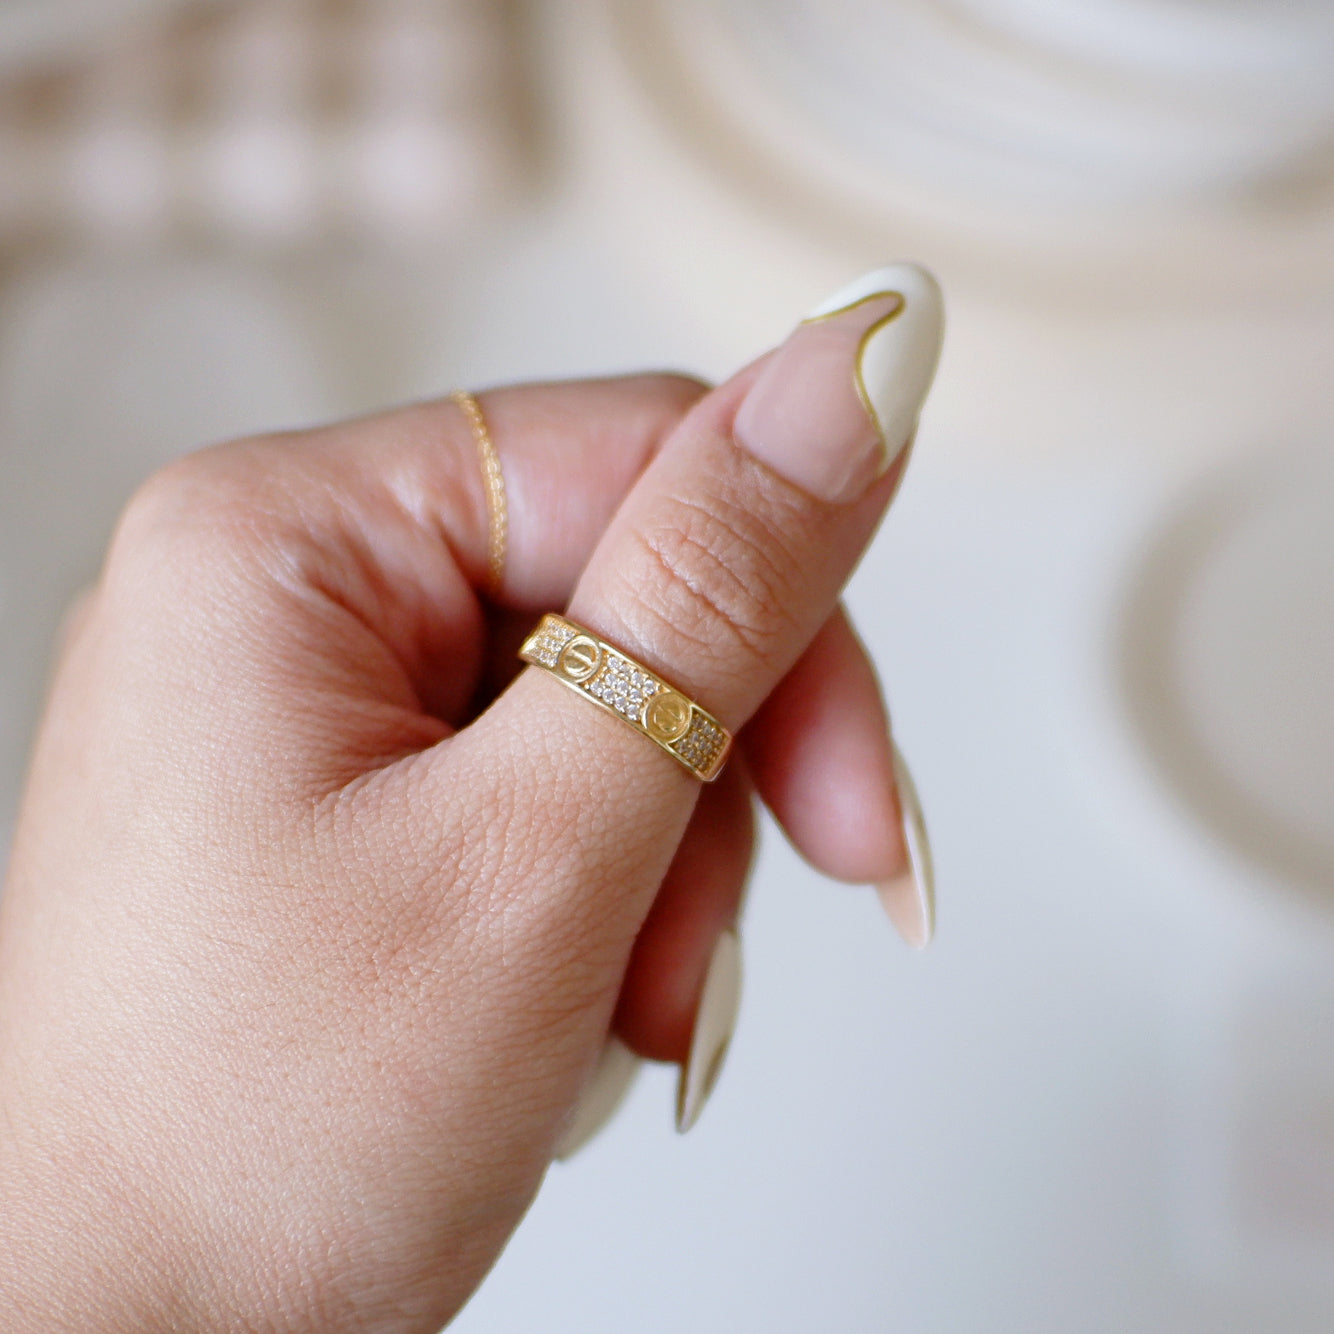 The Half Pave Ring in Solid Gold